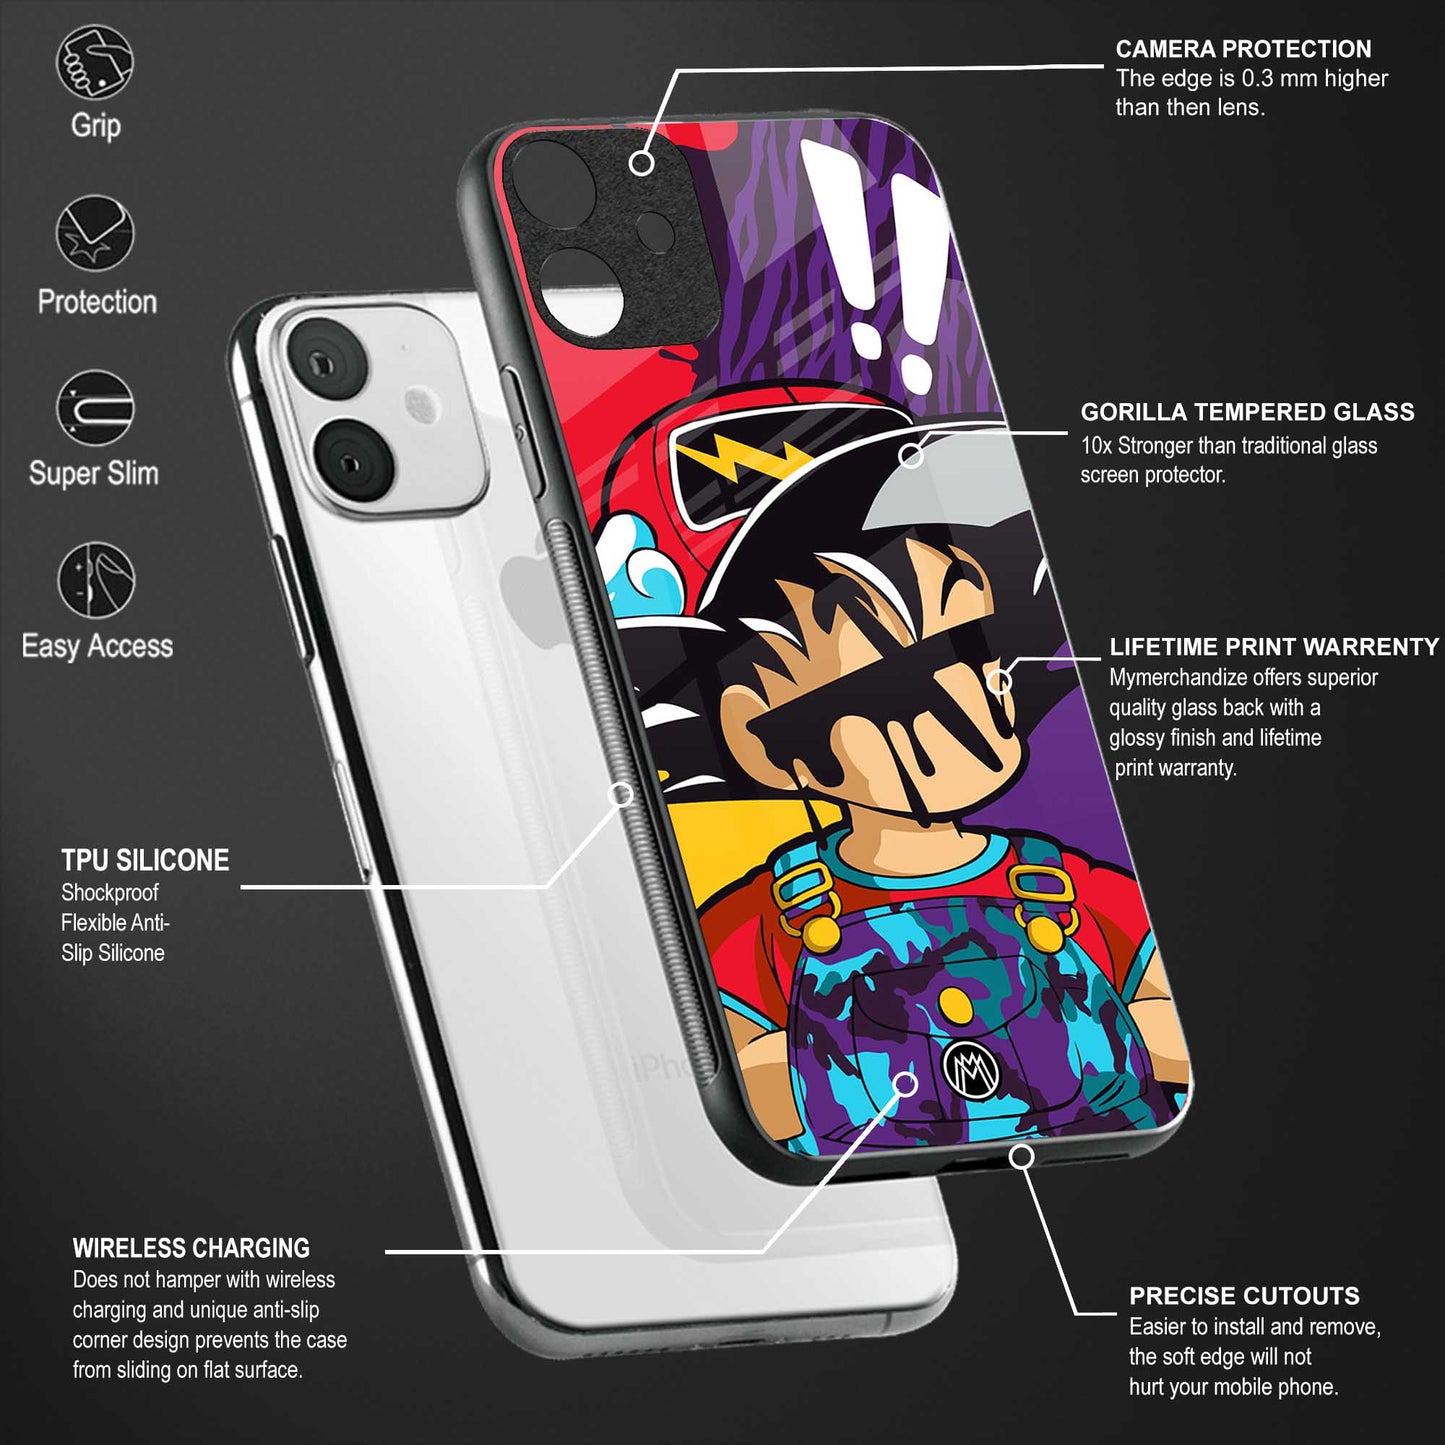 dragon ball z art phone cover for oppo a15s